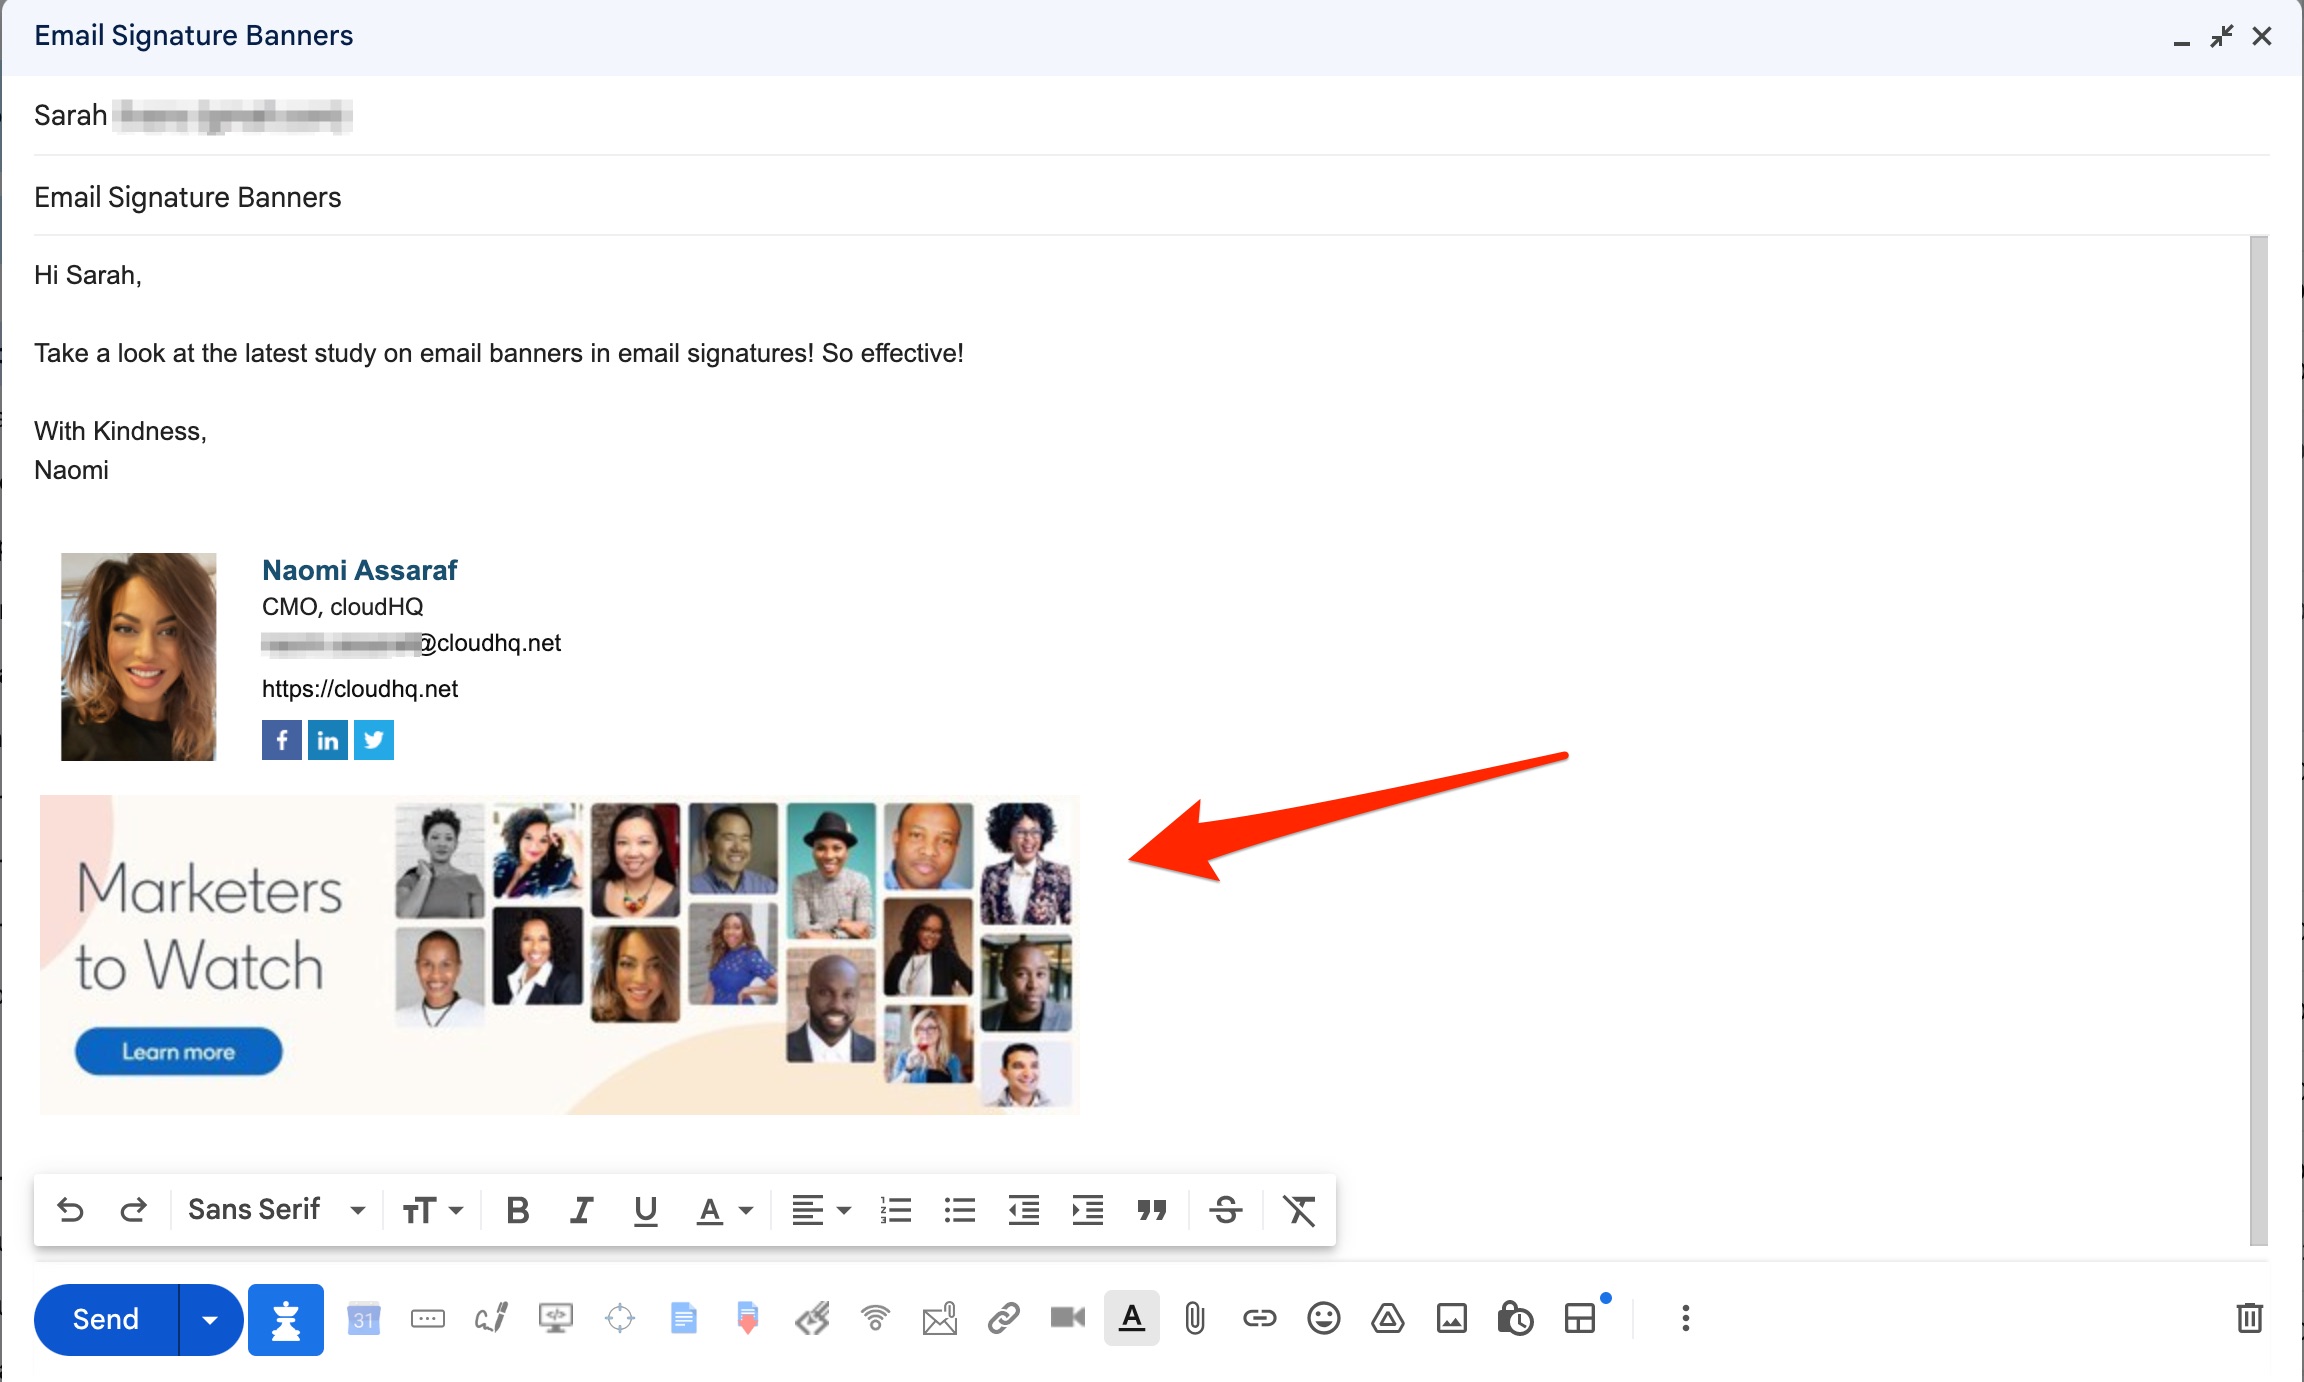 How to Use Banners in Email Signatures